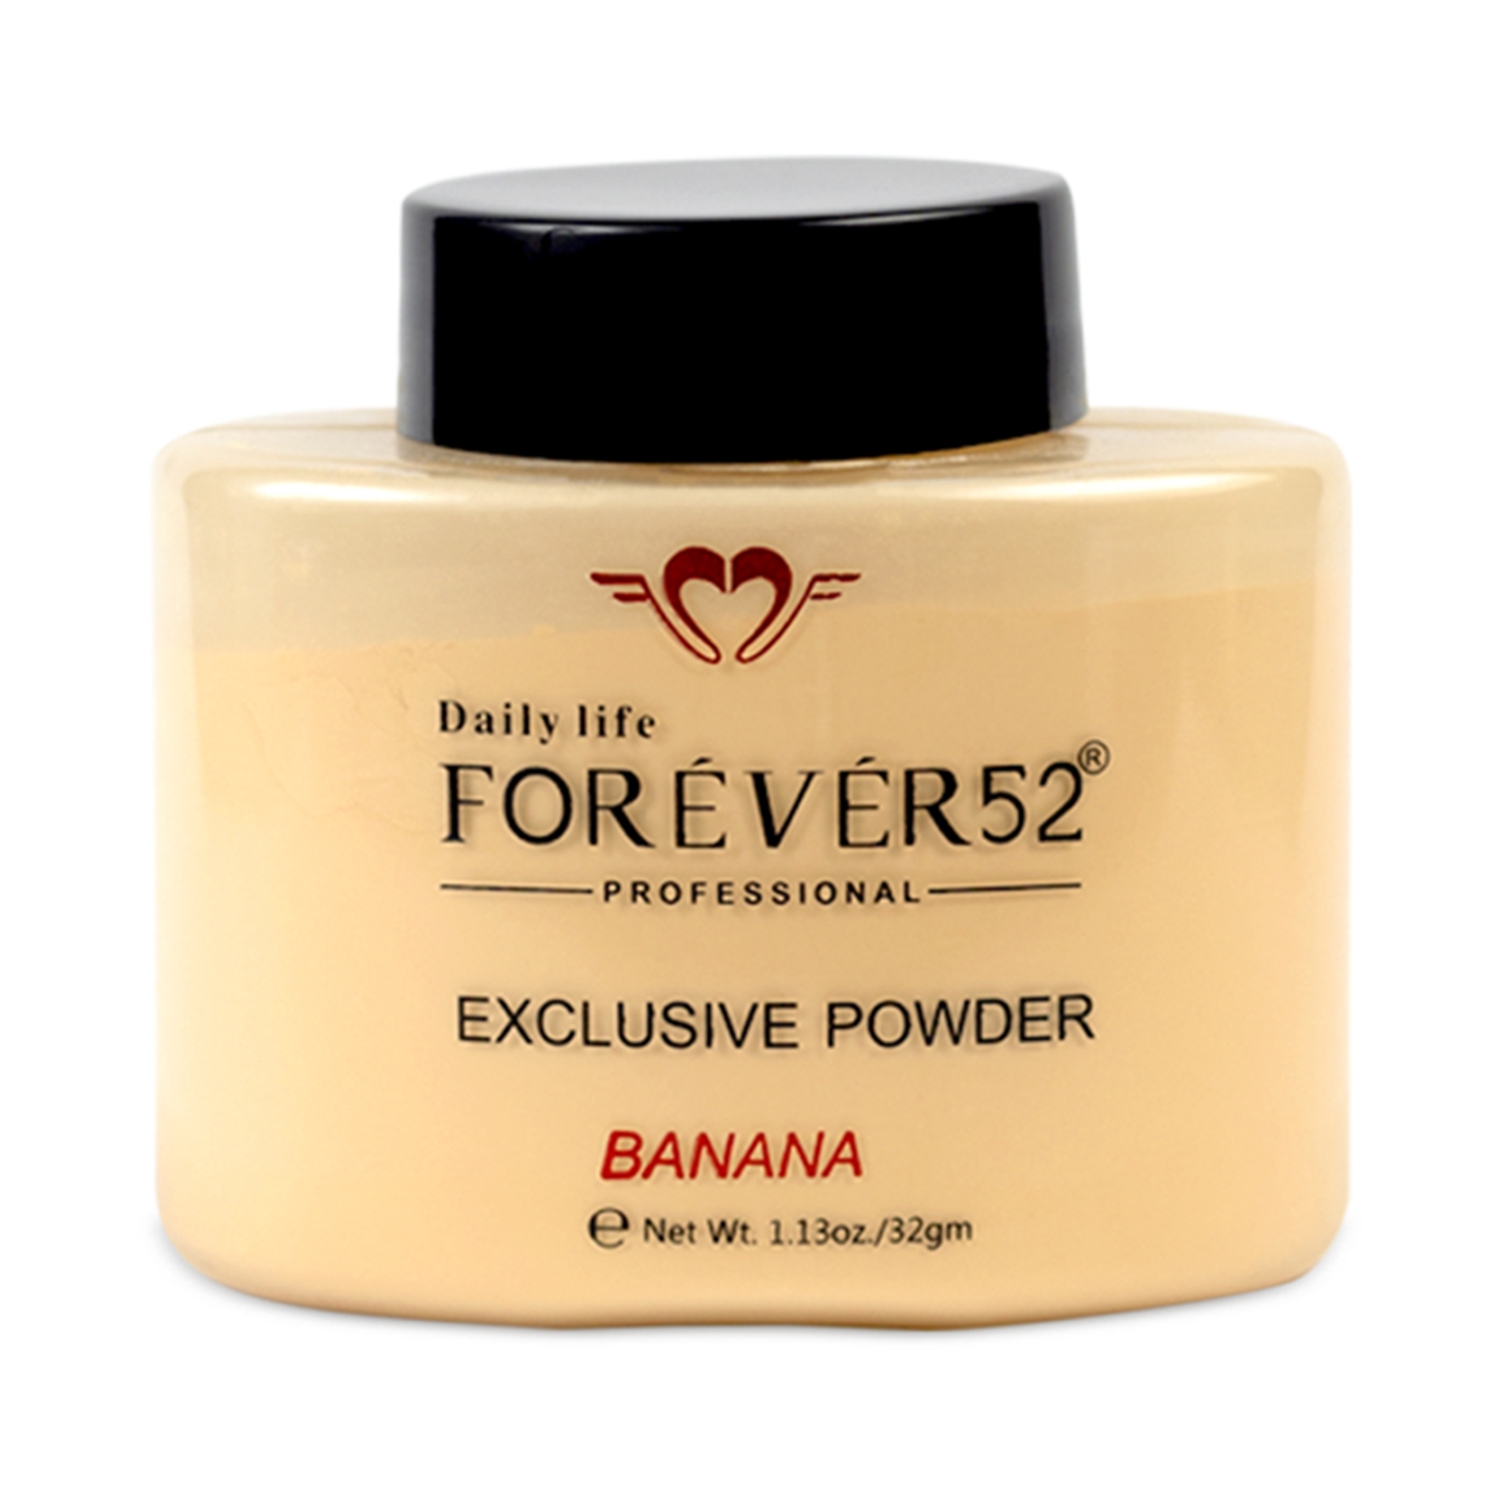 Daily Life Forever52 | Daily Life Forever52 Banana Powder FBE001 (32gm)